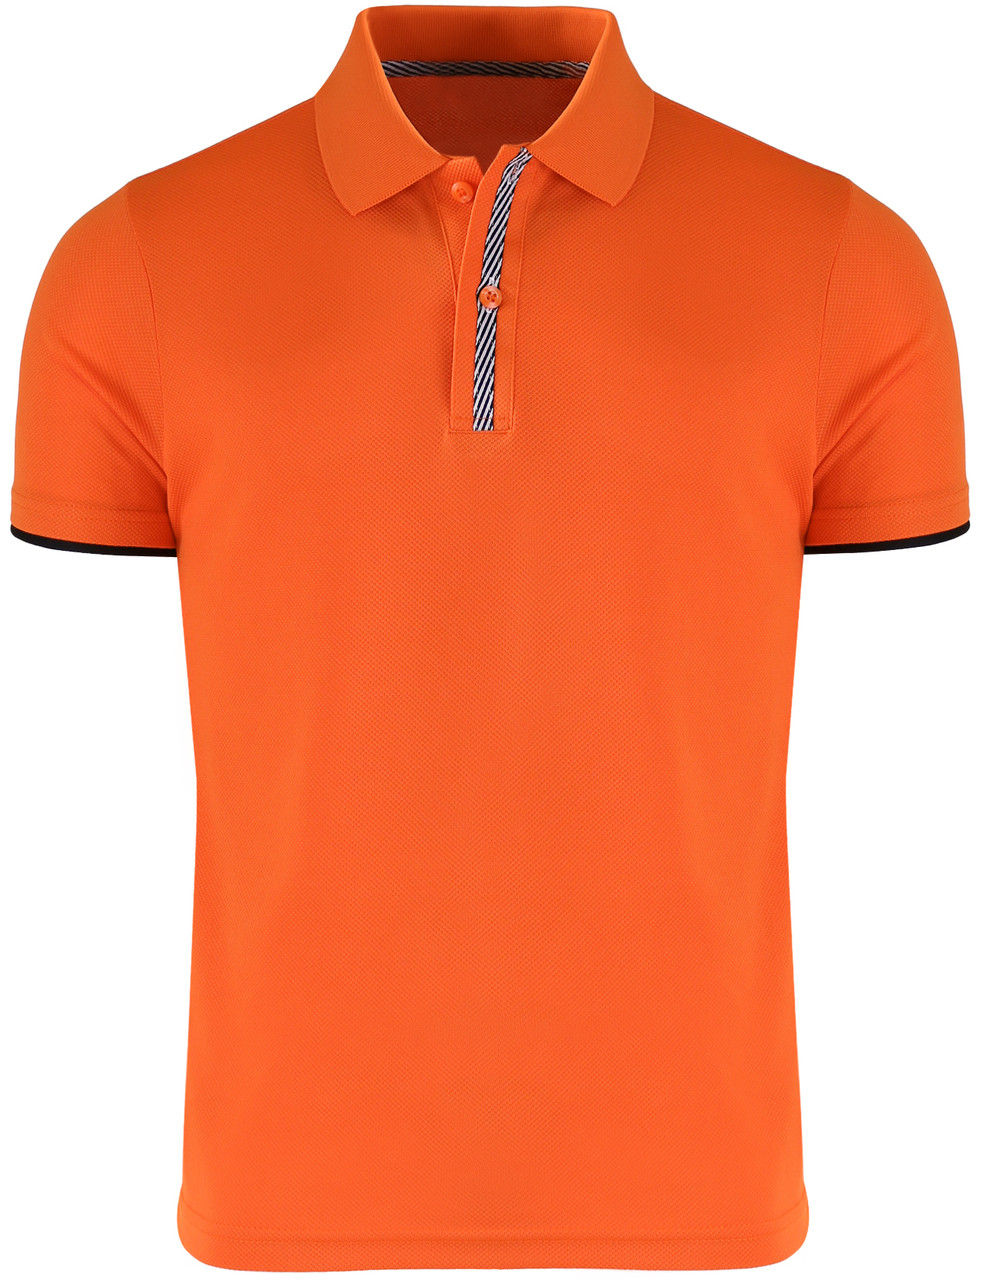 BCPOLO Solid Polo Shirt Short Sleeve-4 colors-Unisex